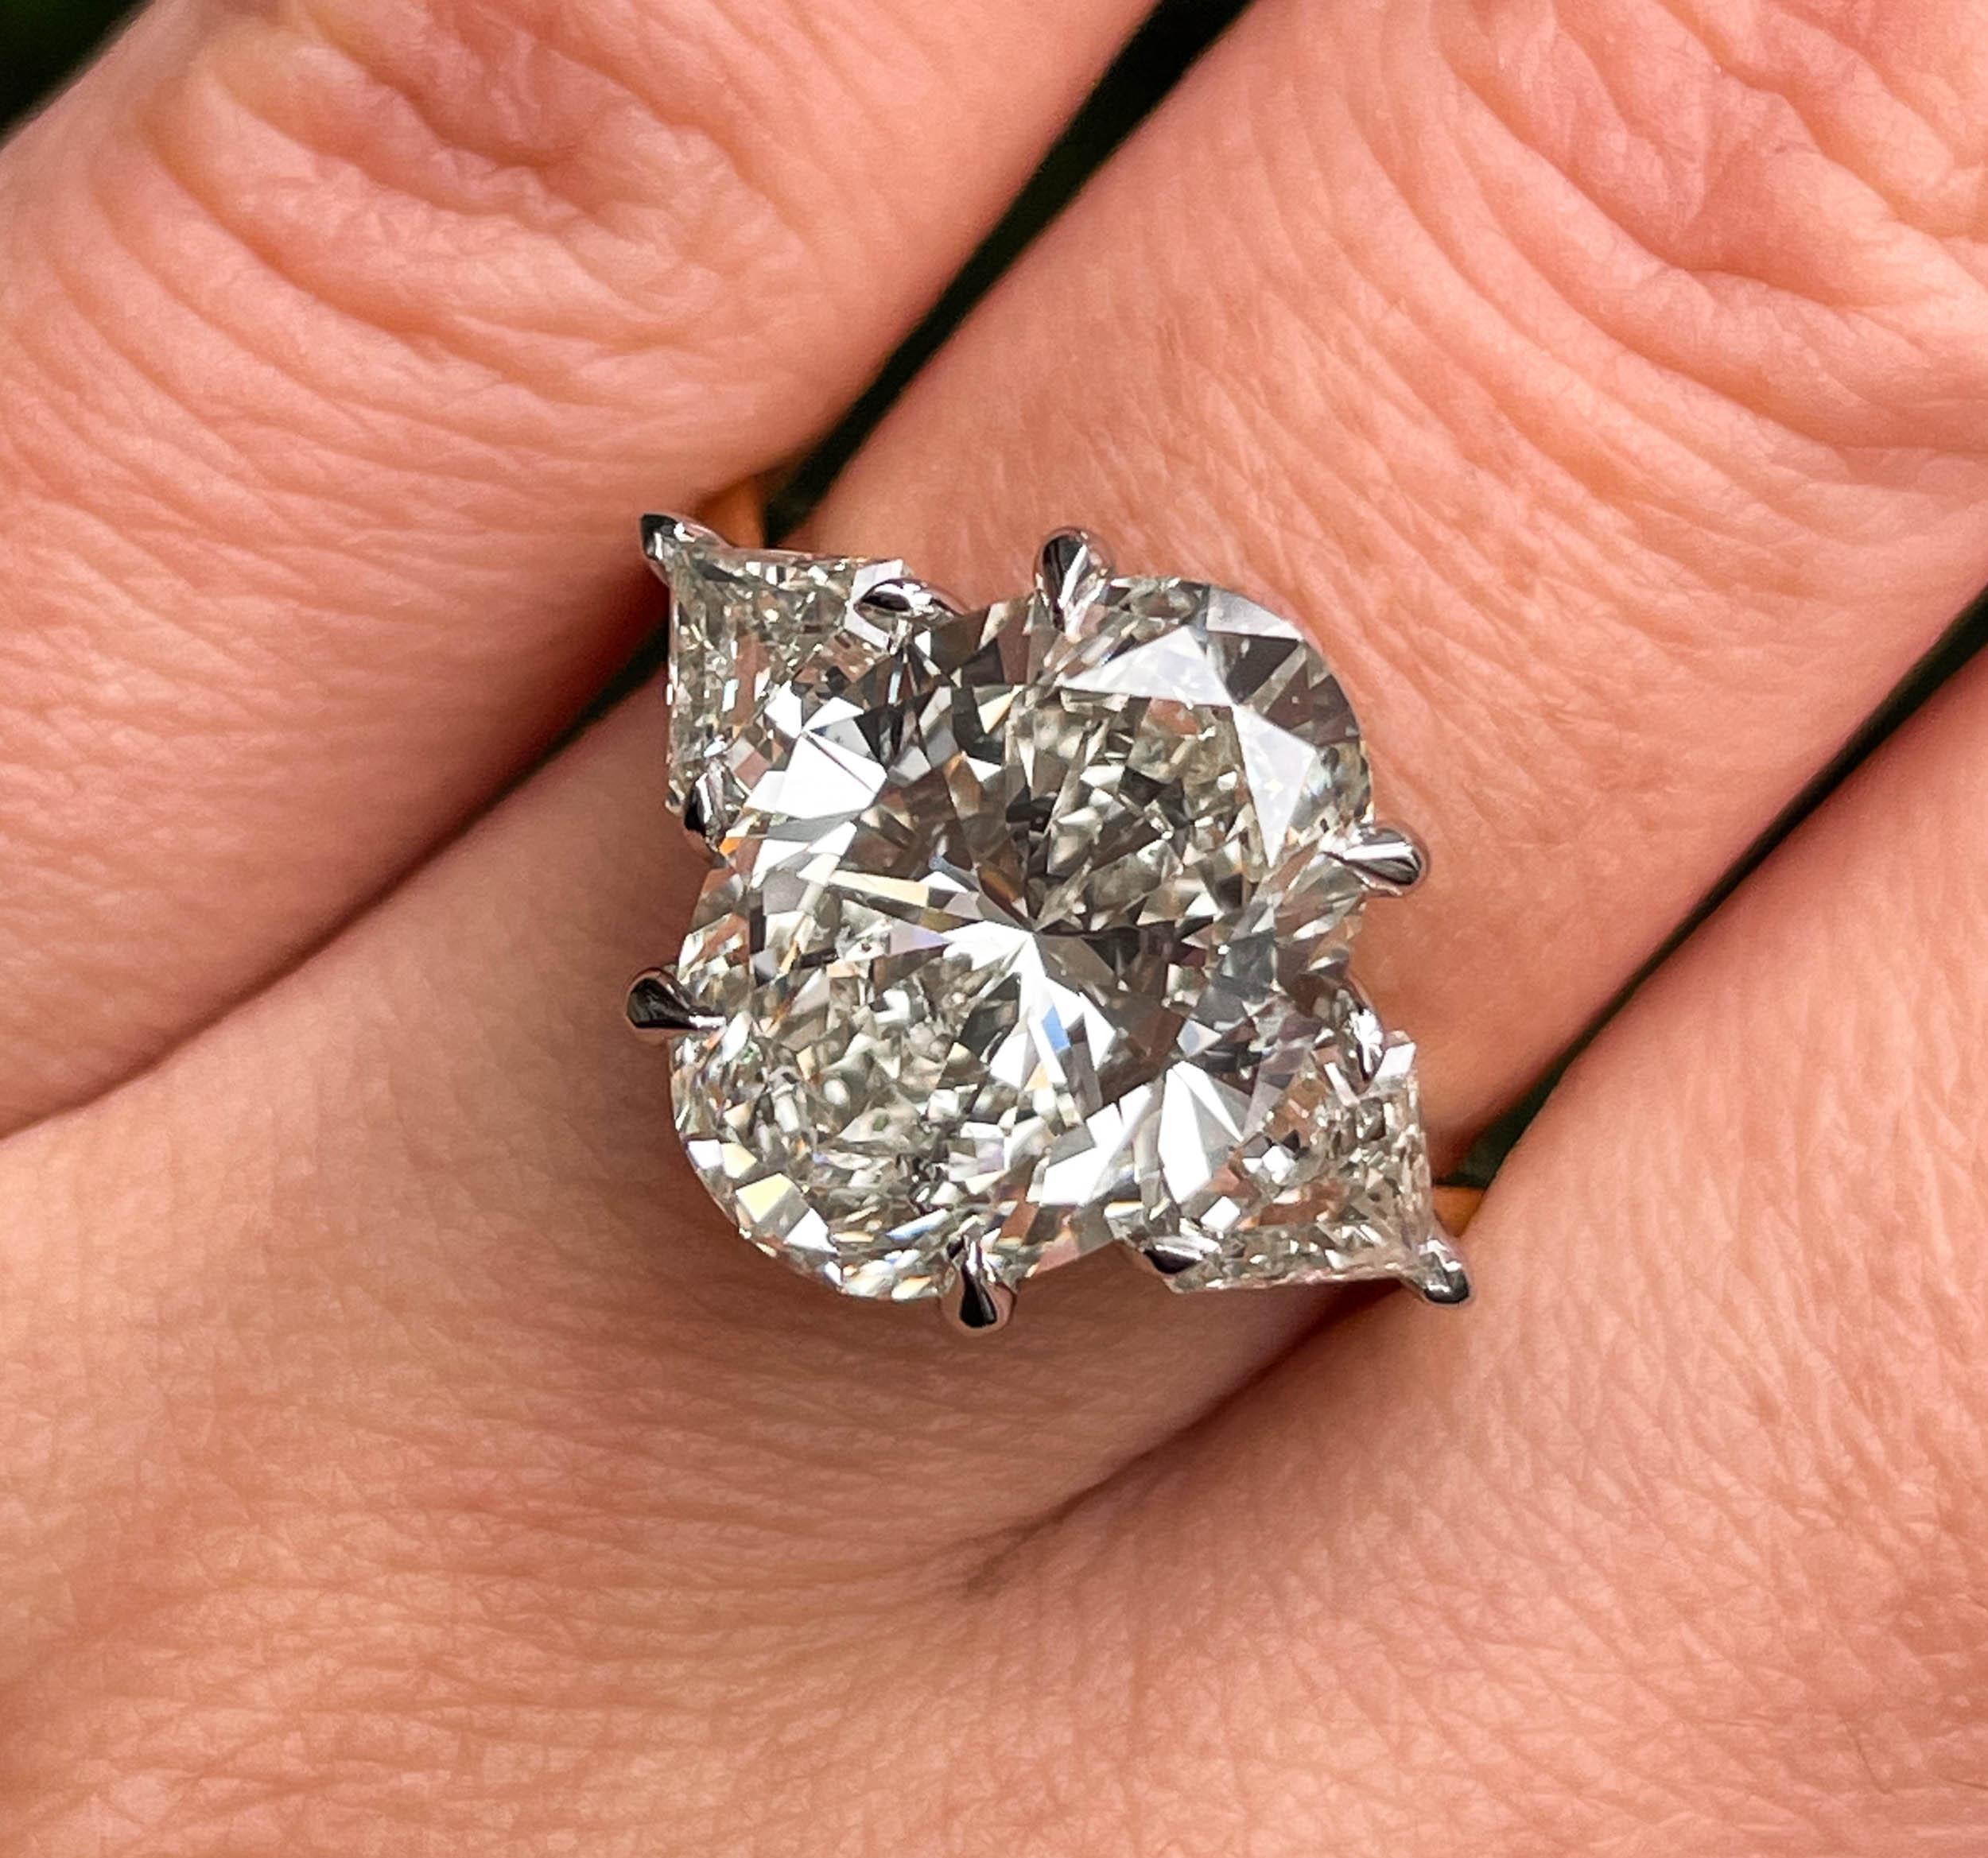 A Breathtaking Estate HANDMADE Platinum and 18k Yellow Gold (stamped) Oval Diamond Three-Stone Engagement ring. The Prong Set Oval Shaped Center Diamond is GIA Certified 5.01CT with measurements of 13.07x9.54x6.16mm in M color SI2 clarity (Appears